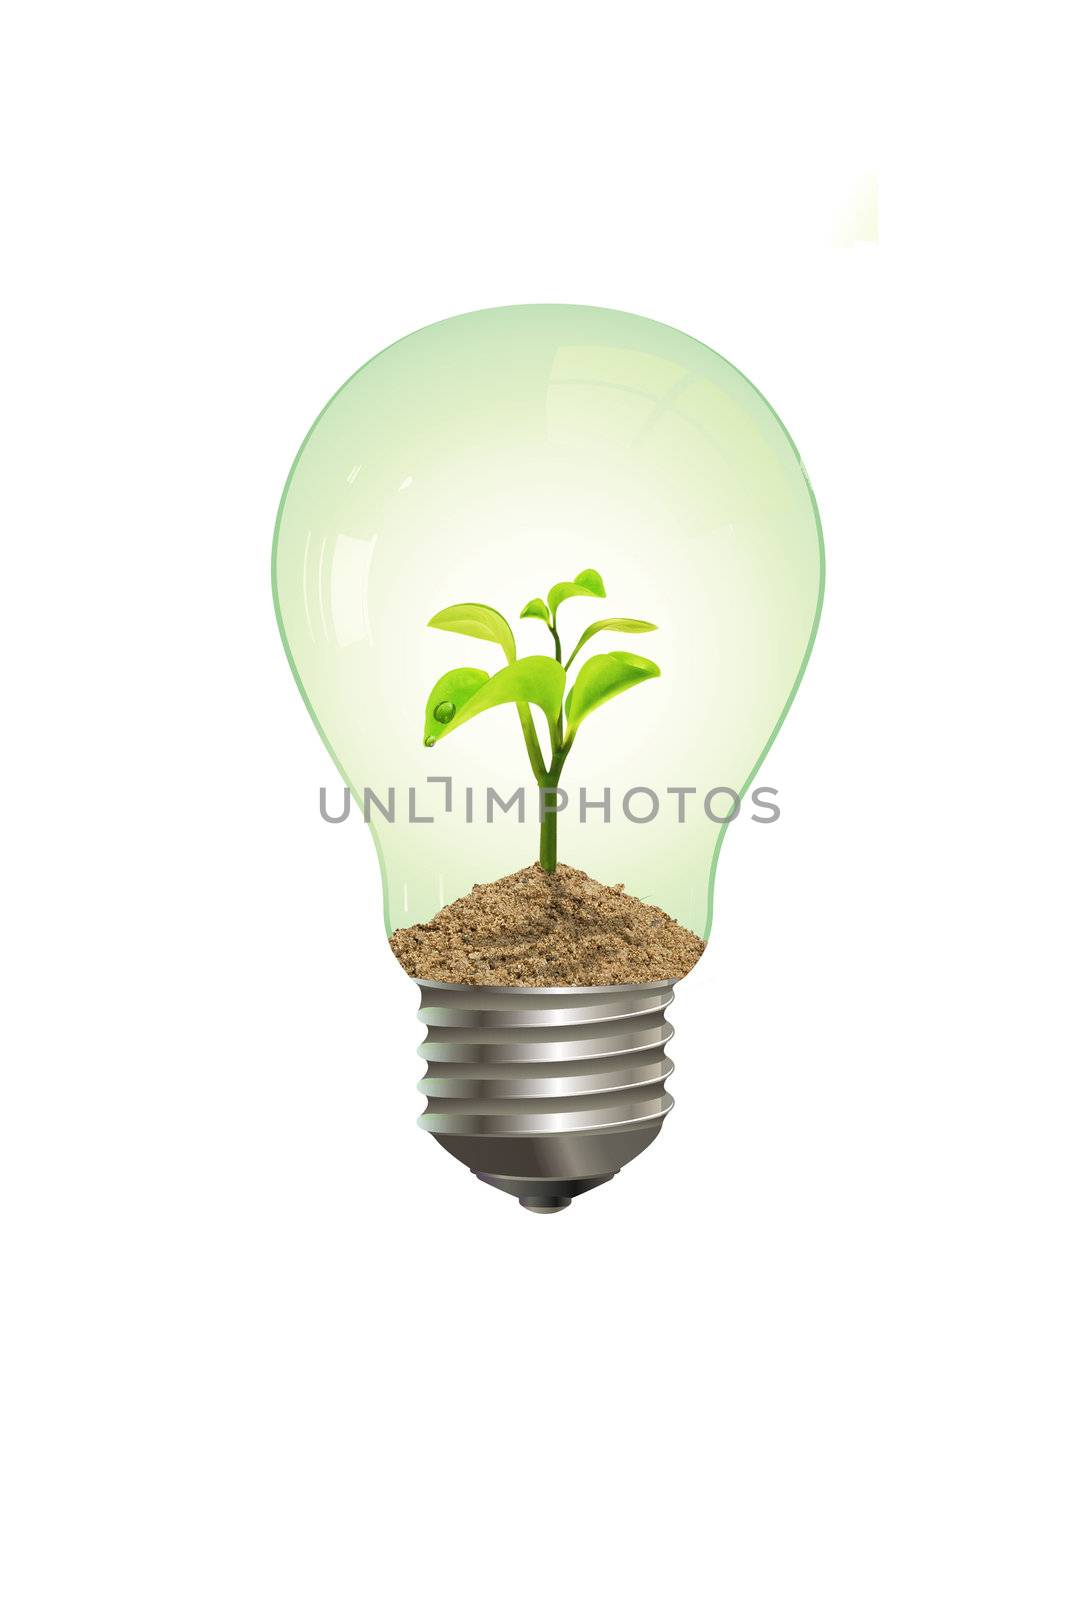 Nice electric lamp with a green plant in it